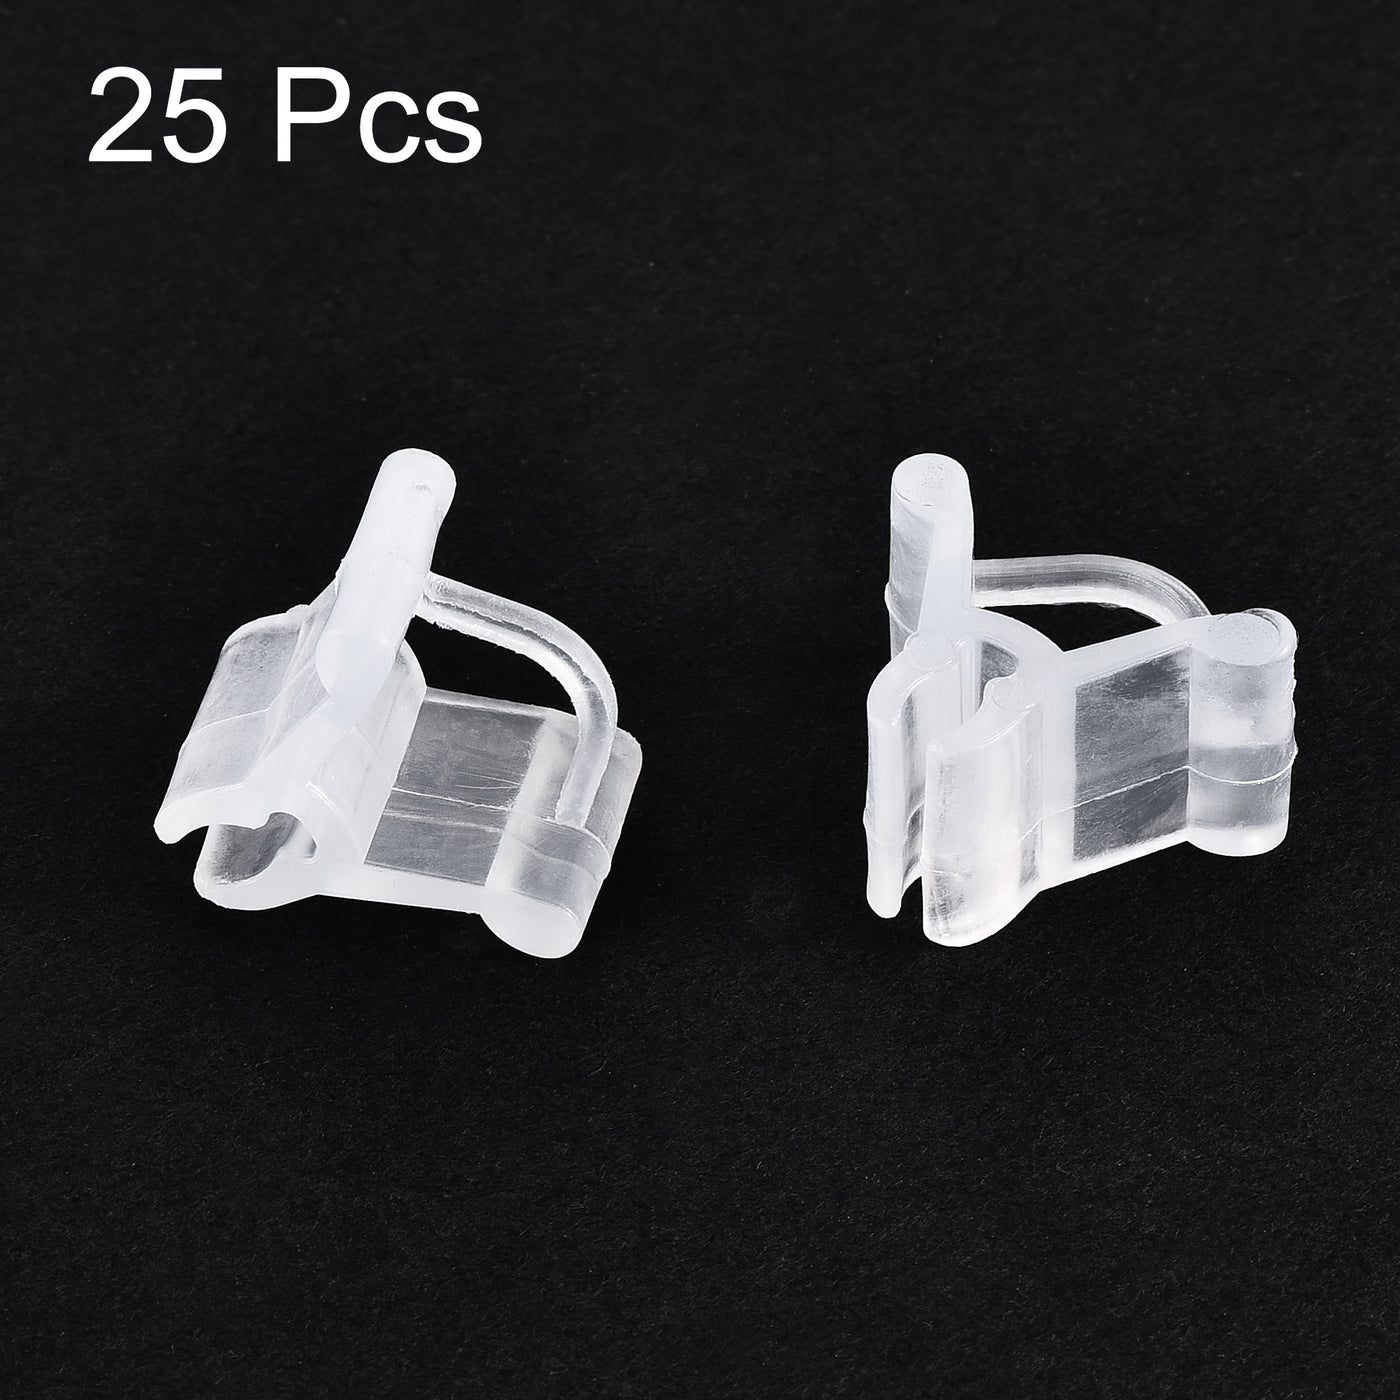 uxcell Uxcell PE Grafting Clips 2.2mm to 4.5mm for Garden Trellis Greenhouse Clear 25pcs